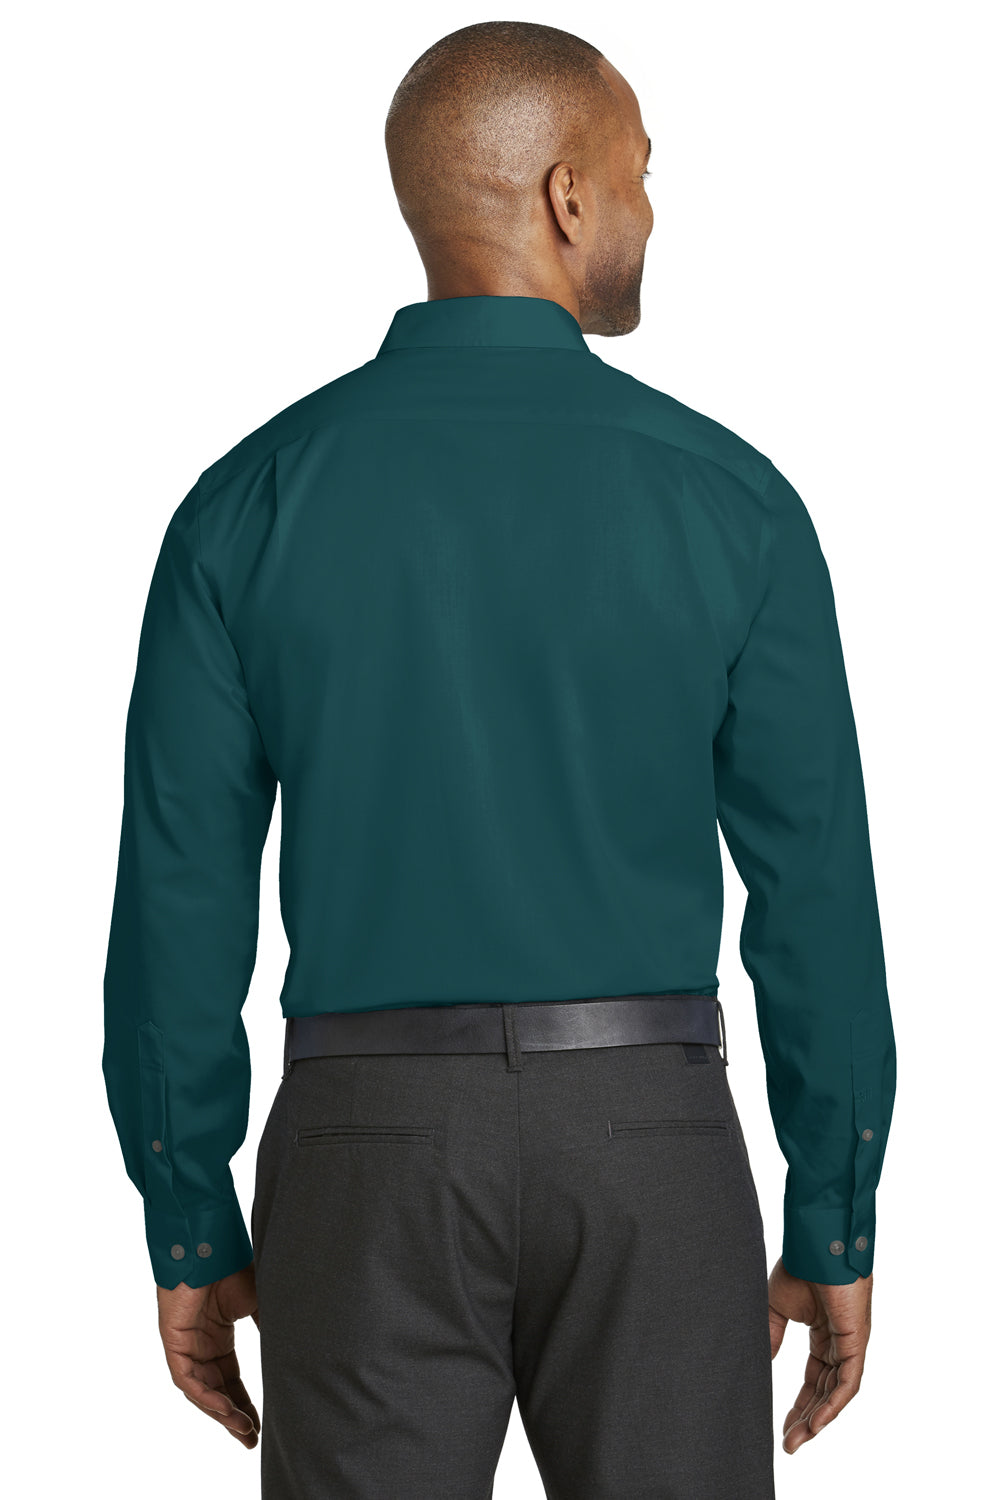 Red House RH80 Mens Wrinkle Resistant Long Sleeve Button Down Shirt w/ Pocket Bluegrass Green Back